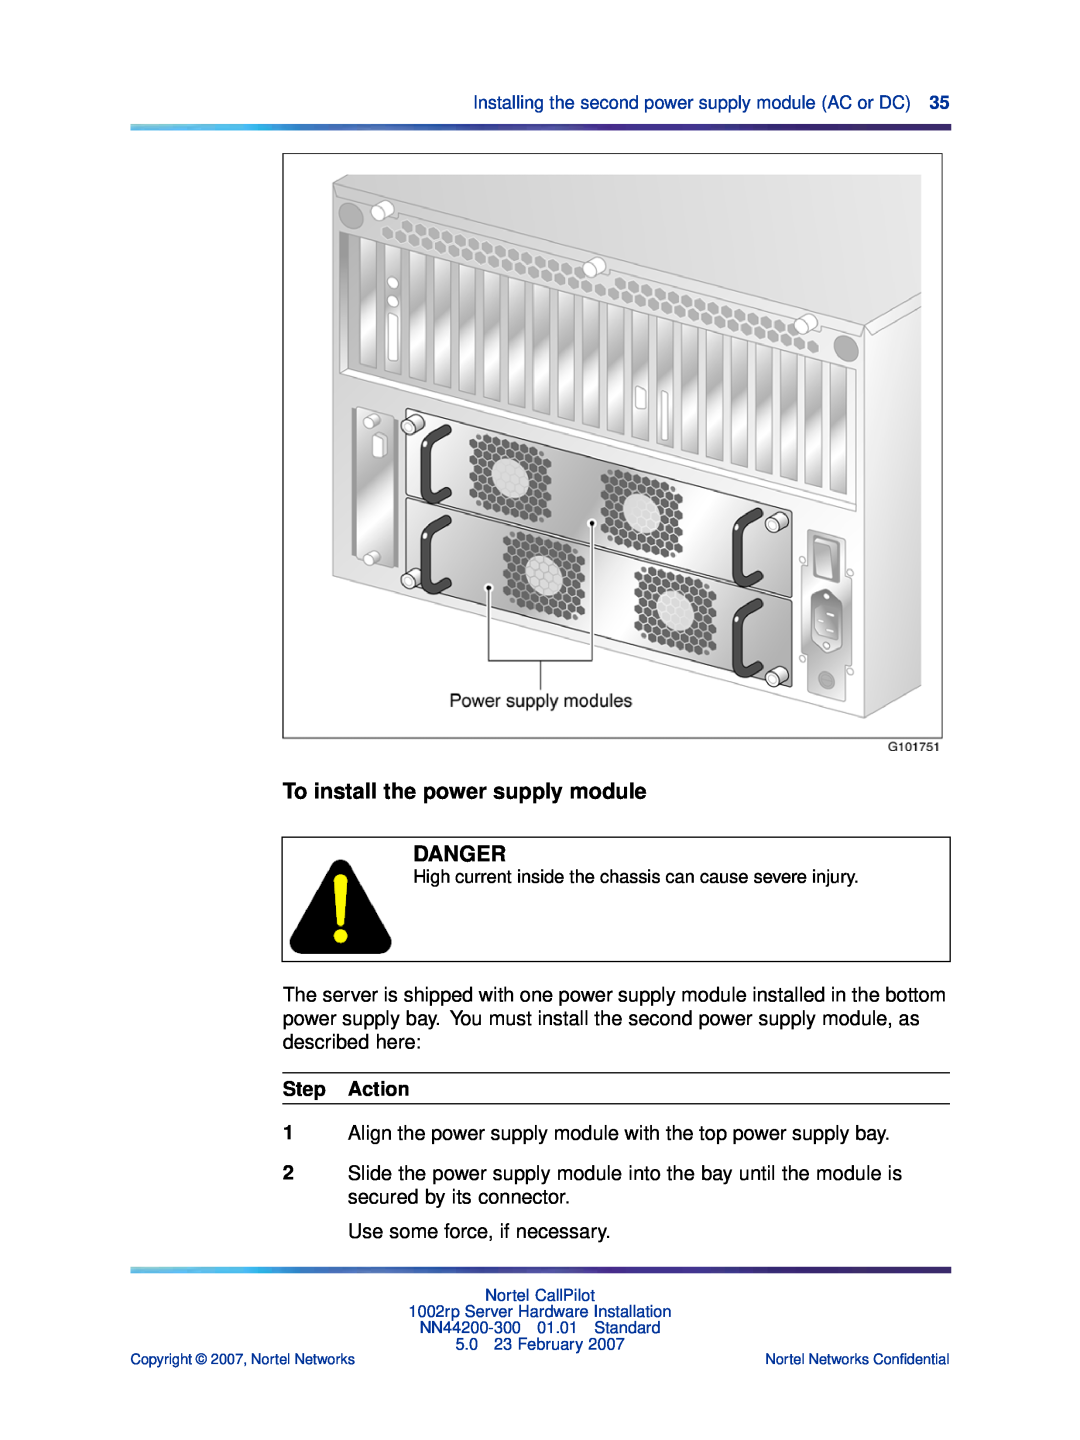 Nortel Networks NN44200-300 manual To install the power supply module DANGER, Step Action 